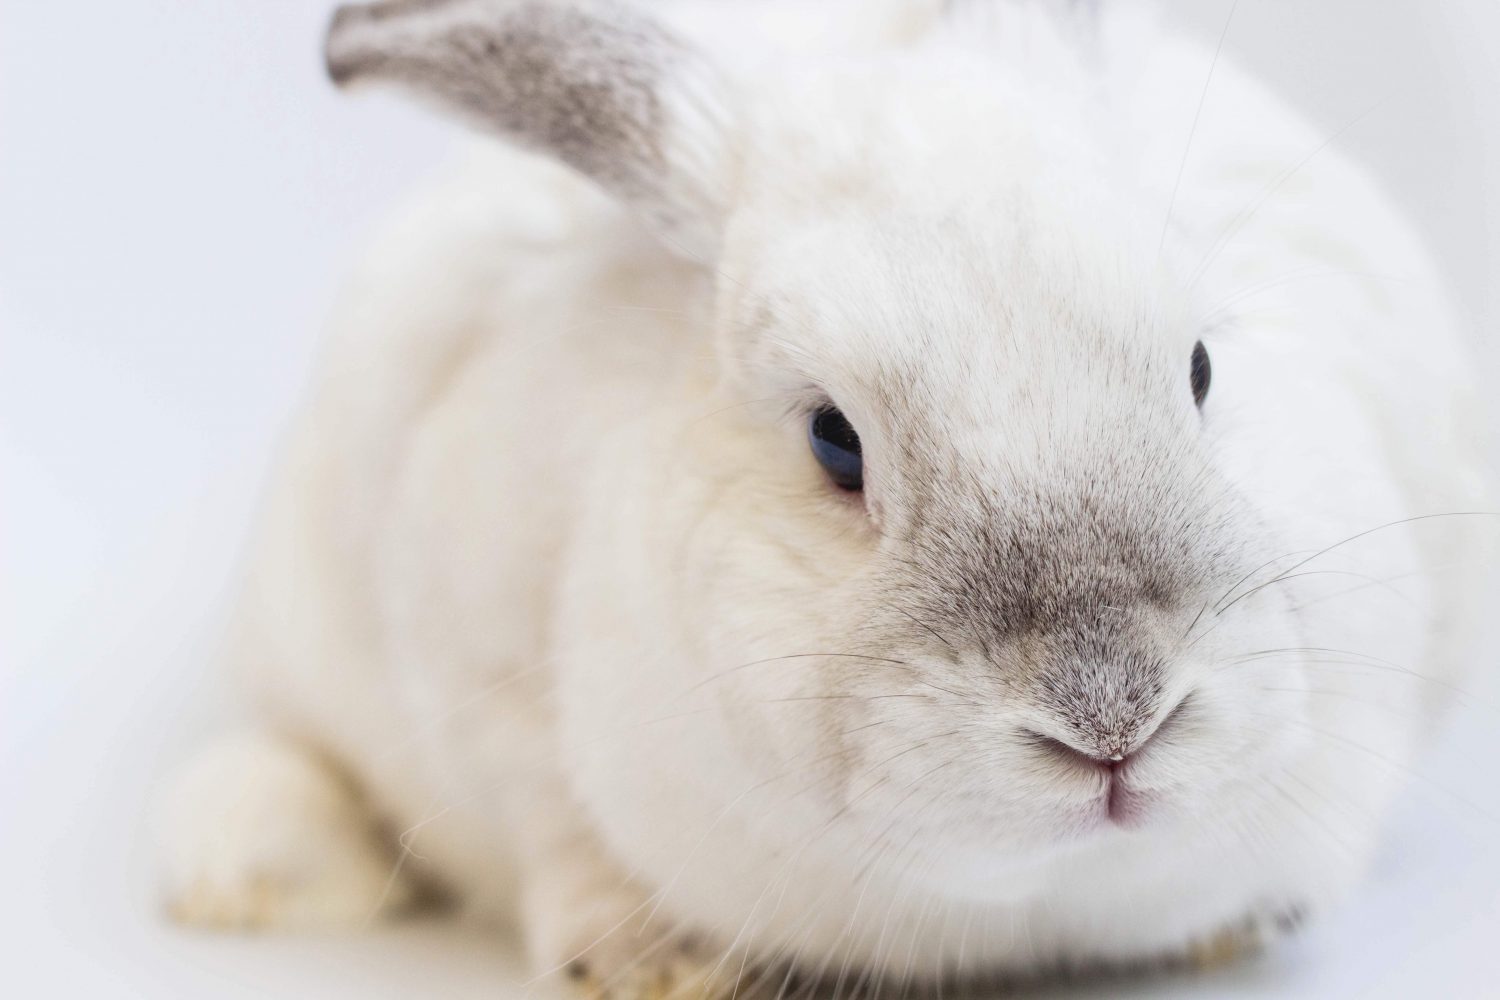 Cruelty-Free Bill Could See End of Cosmetics Animal Testing in Canada - LIVEKINDLY